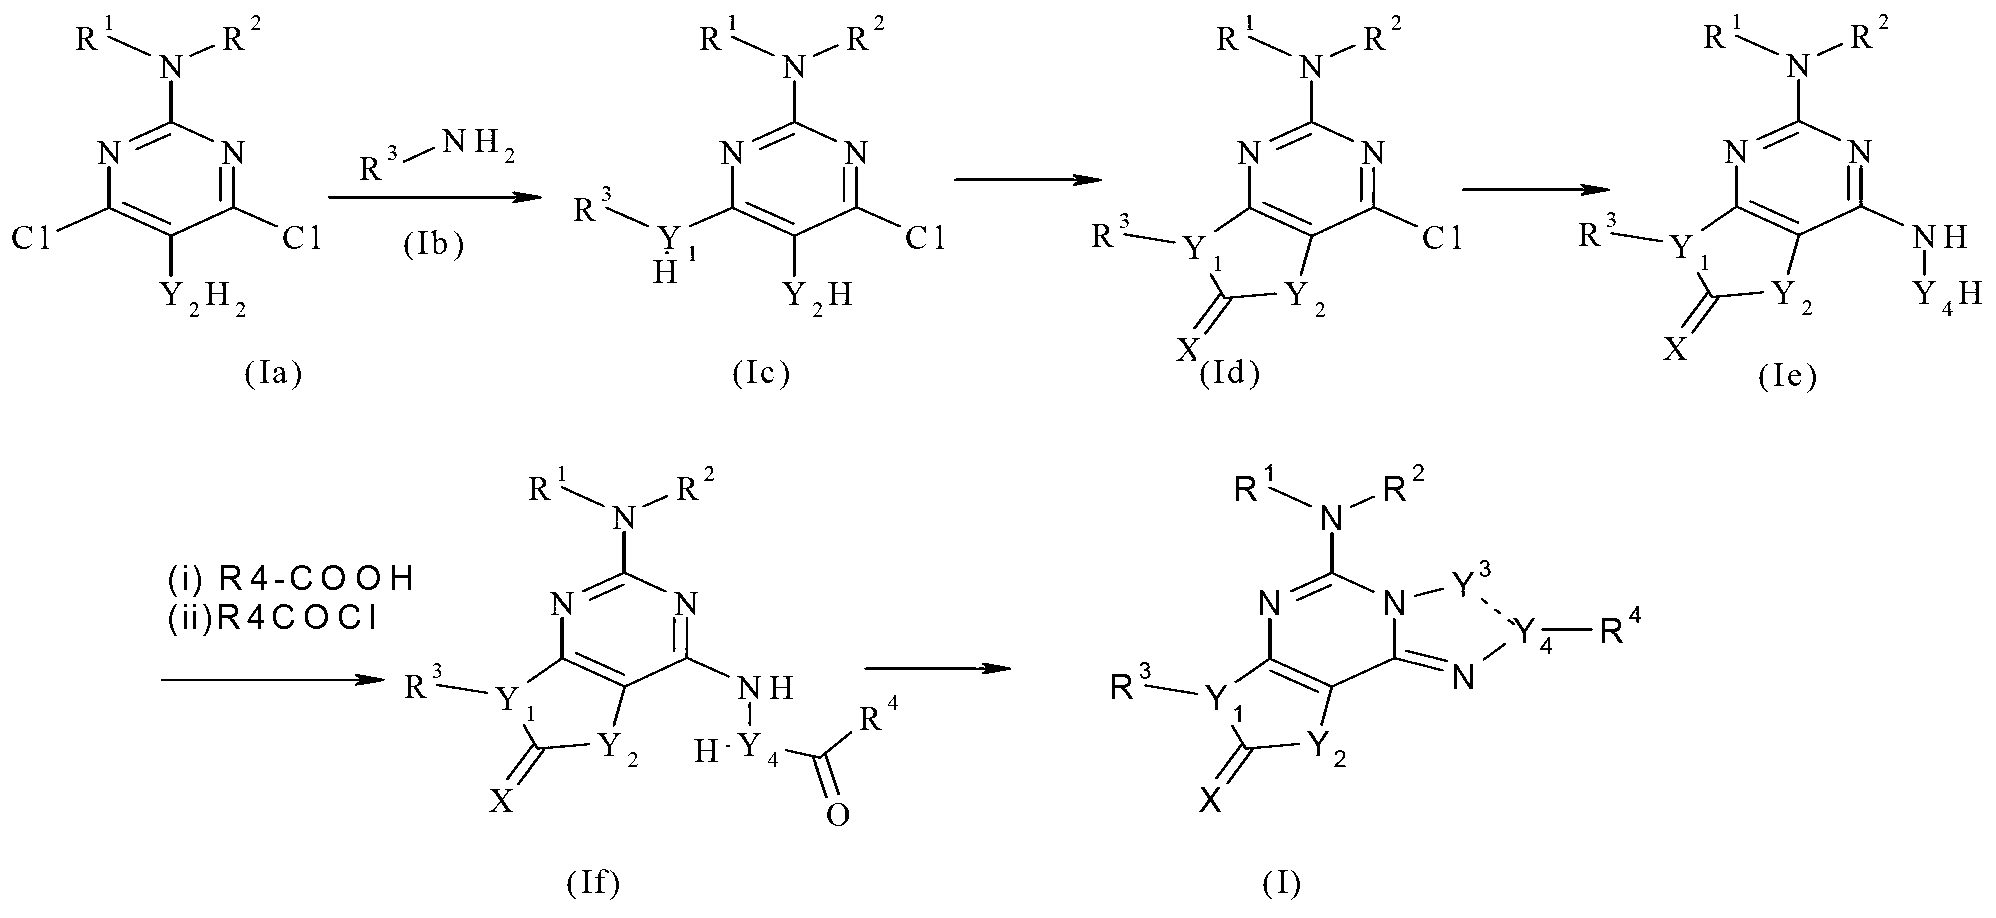 Fused tricyclic compounds as adenosine receptor antagonist